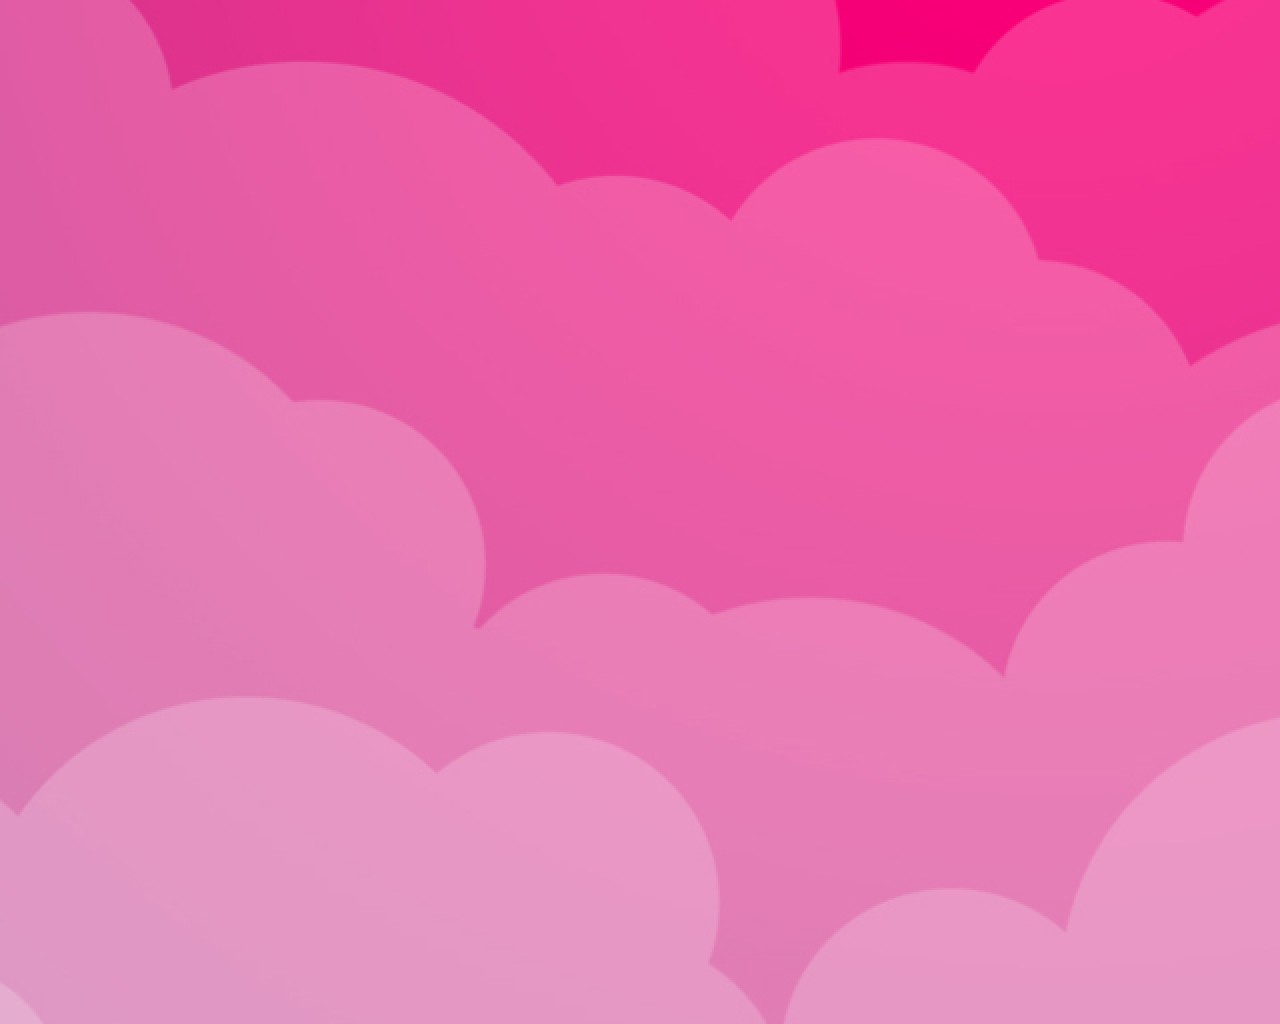 Girly Pink Cute Wallpapers For Laptop - HD Wallpaper 